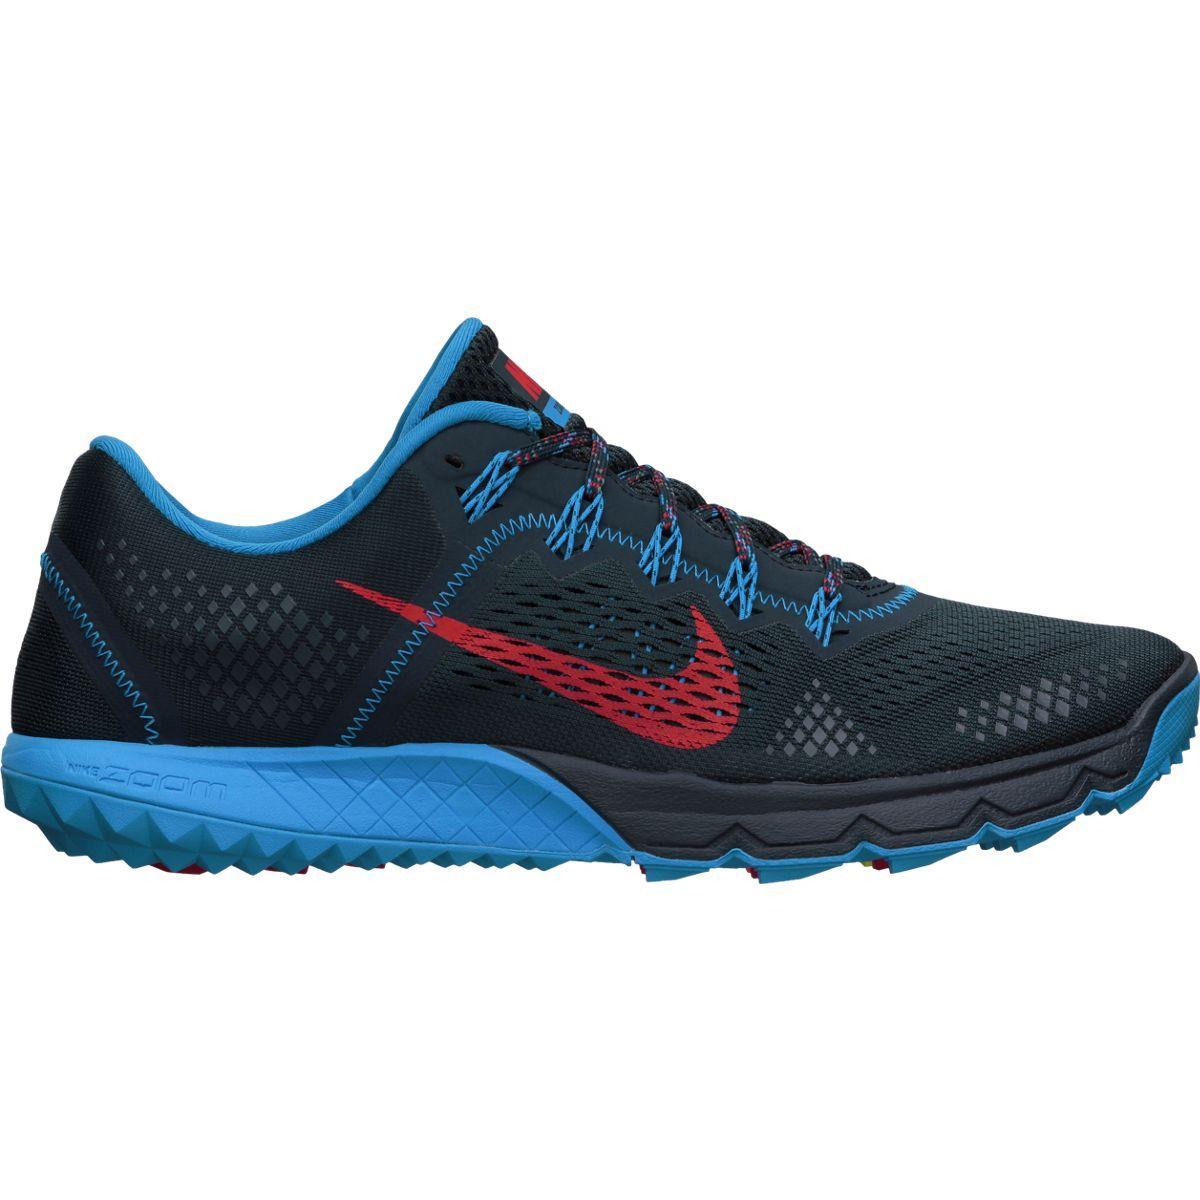 Nike Mens Zoom Terra Kiger Running Shoes - Armoury Navy/Chilling Red ...